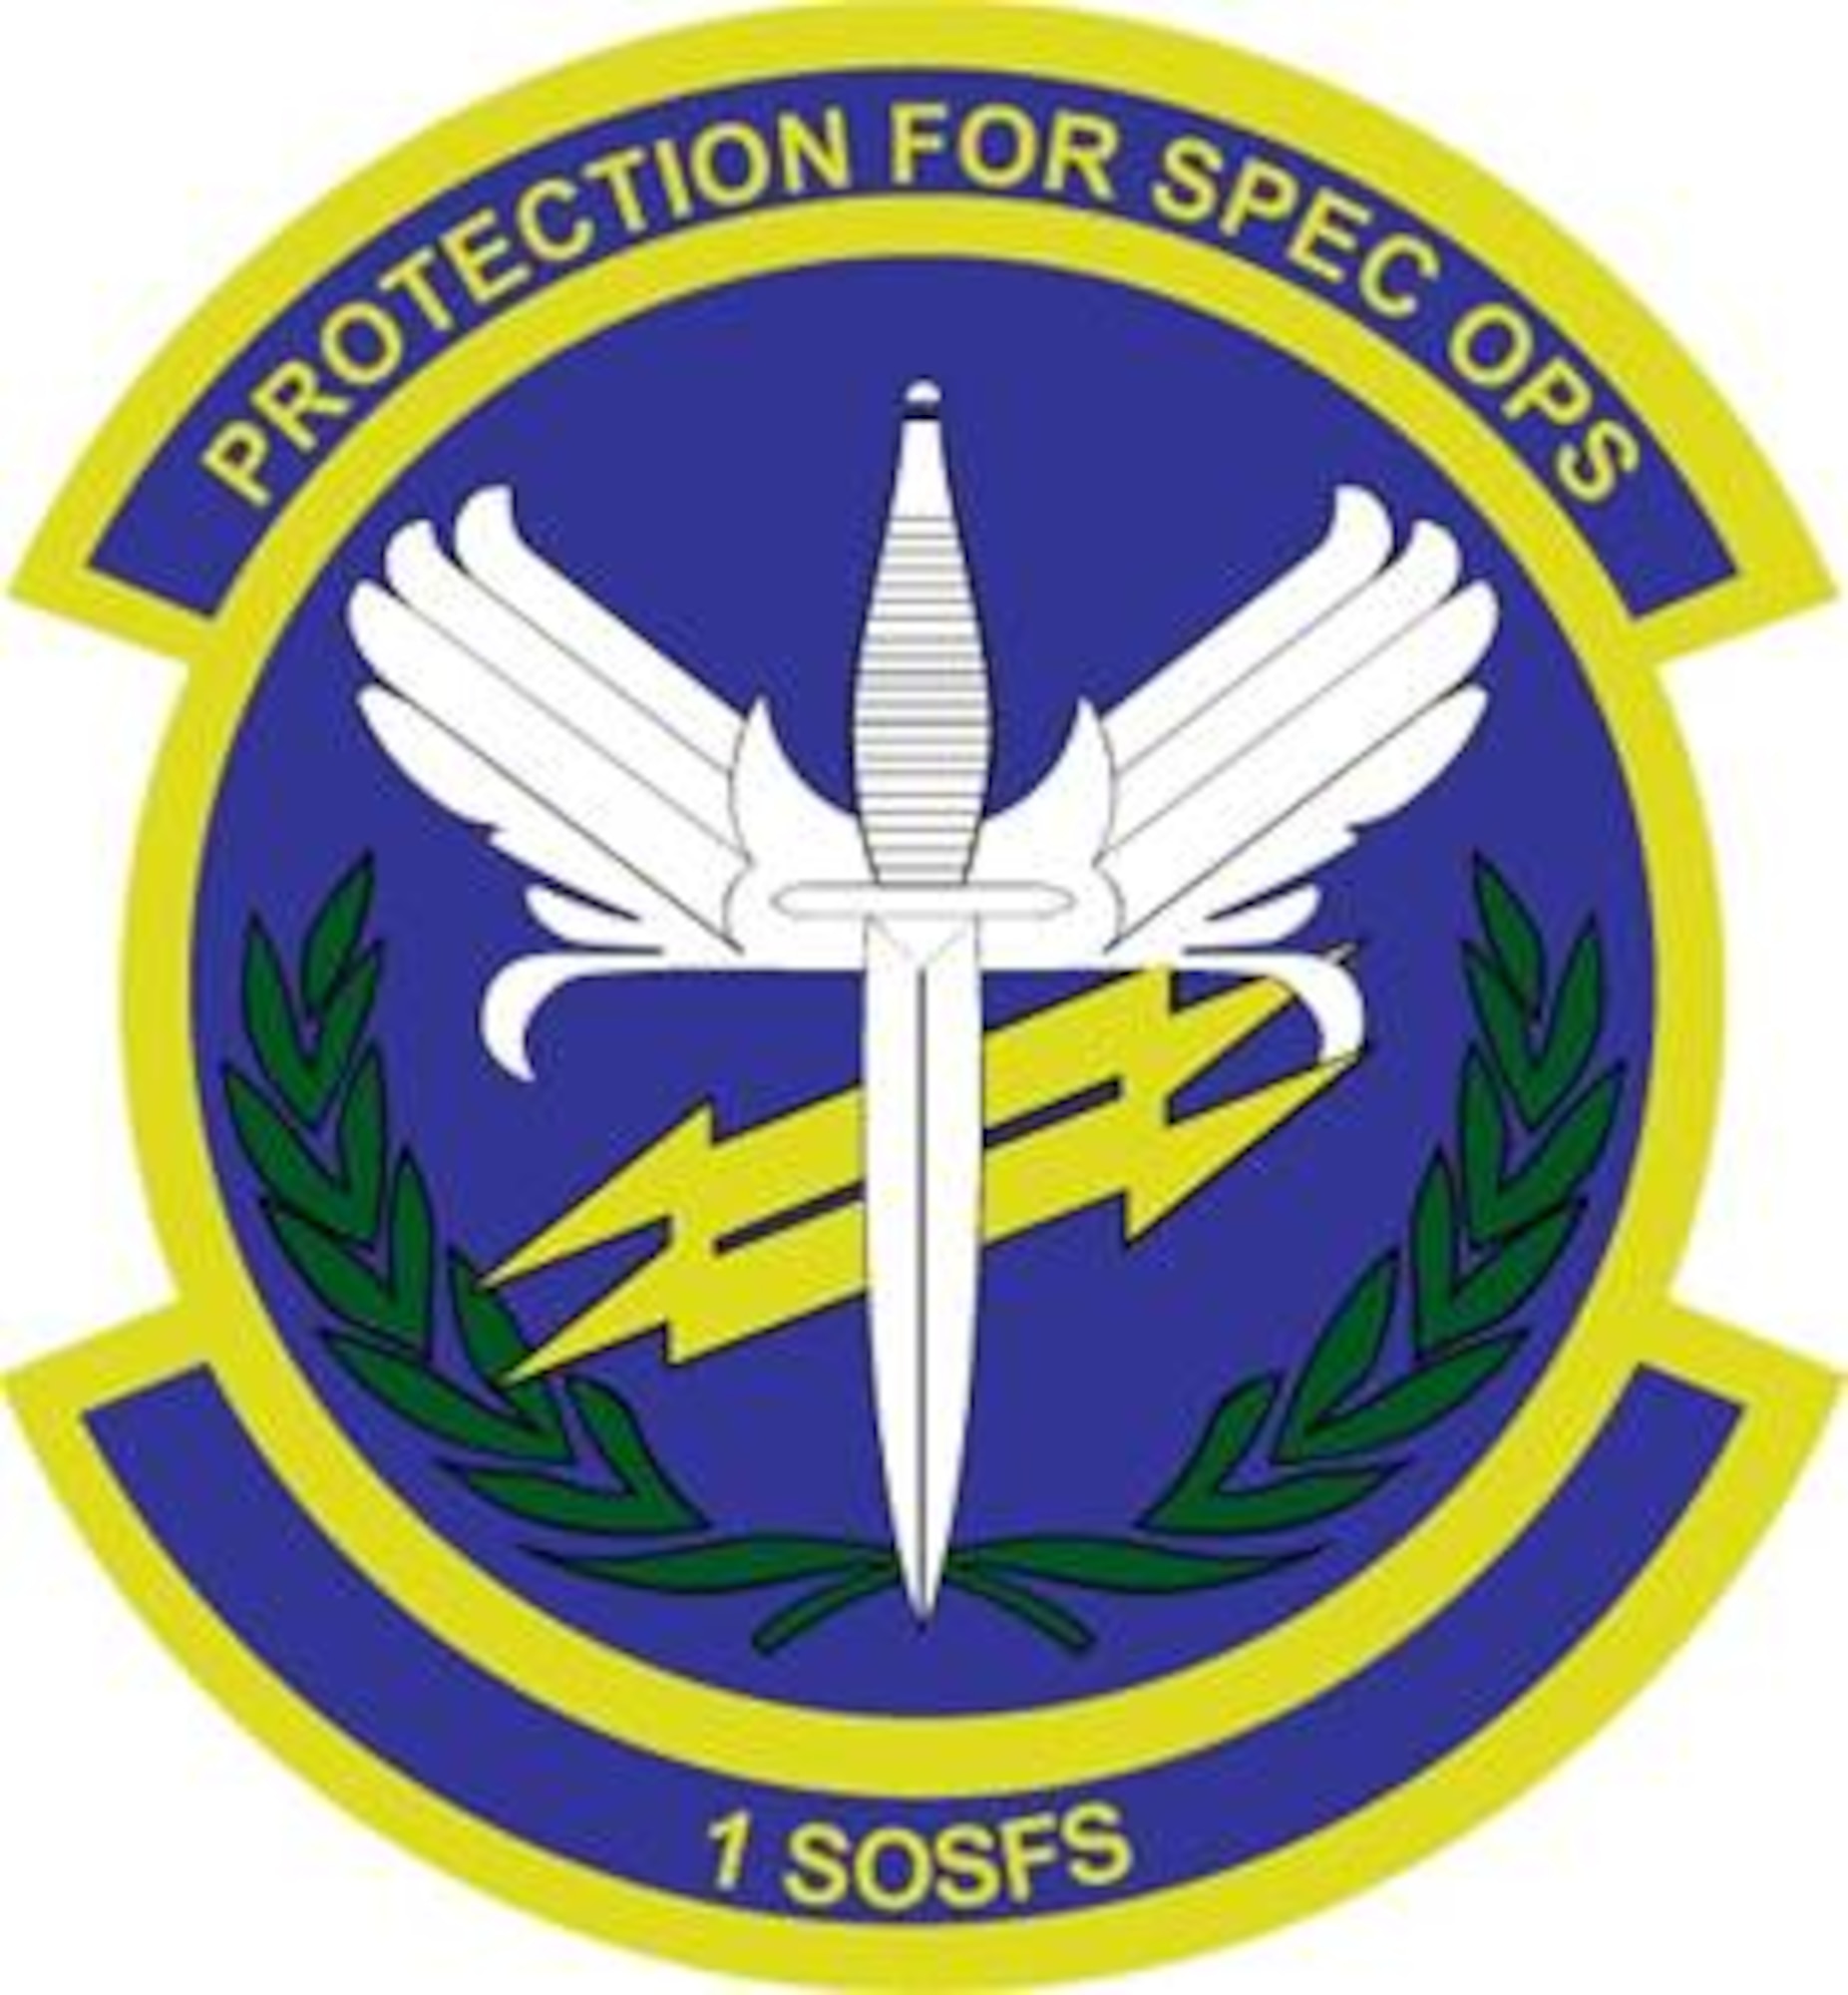 1st Special Operations Security Forces Squadron: Blue represents the sky, the primary theater of Air Force operations. Yellow signifies the sun and the excellence required of Air Force personnel. The white winged dagger depicts the prime wartime function of the Security Forces, air base ground defense. The charge also represents the unit's historical association with Special Operations. The yellow lightning bolts symbolize the dual functions of home station and deployed locations service to the parent organization. The olive branch denotes the peacekeeping function of all Security Forces.